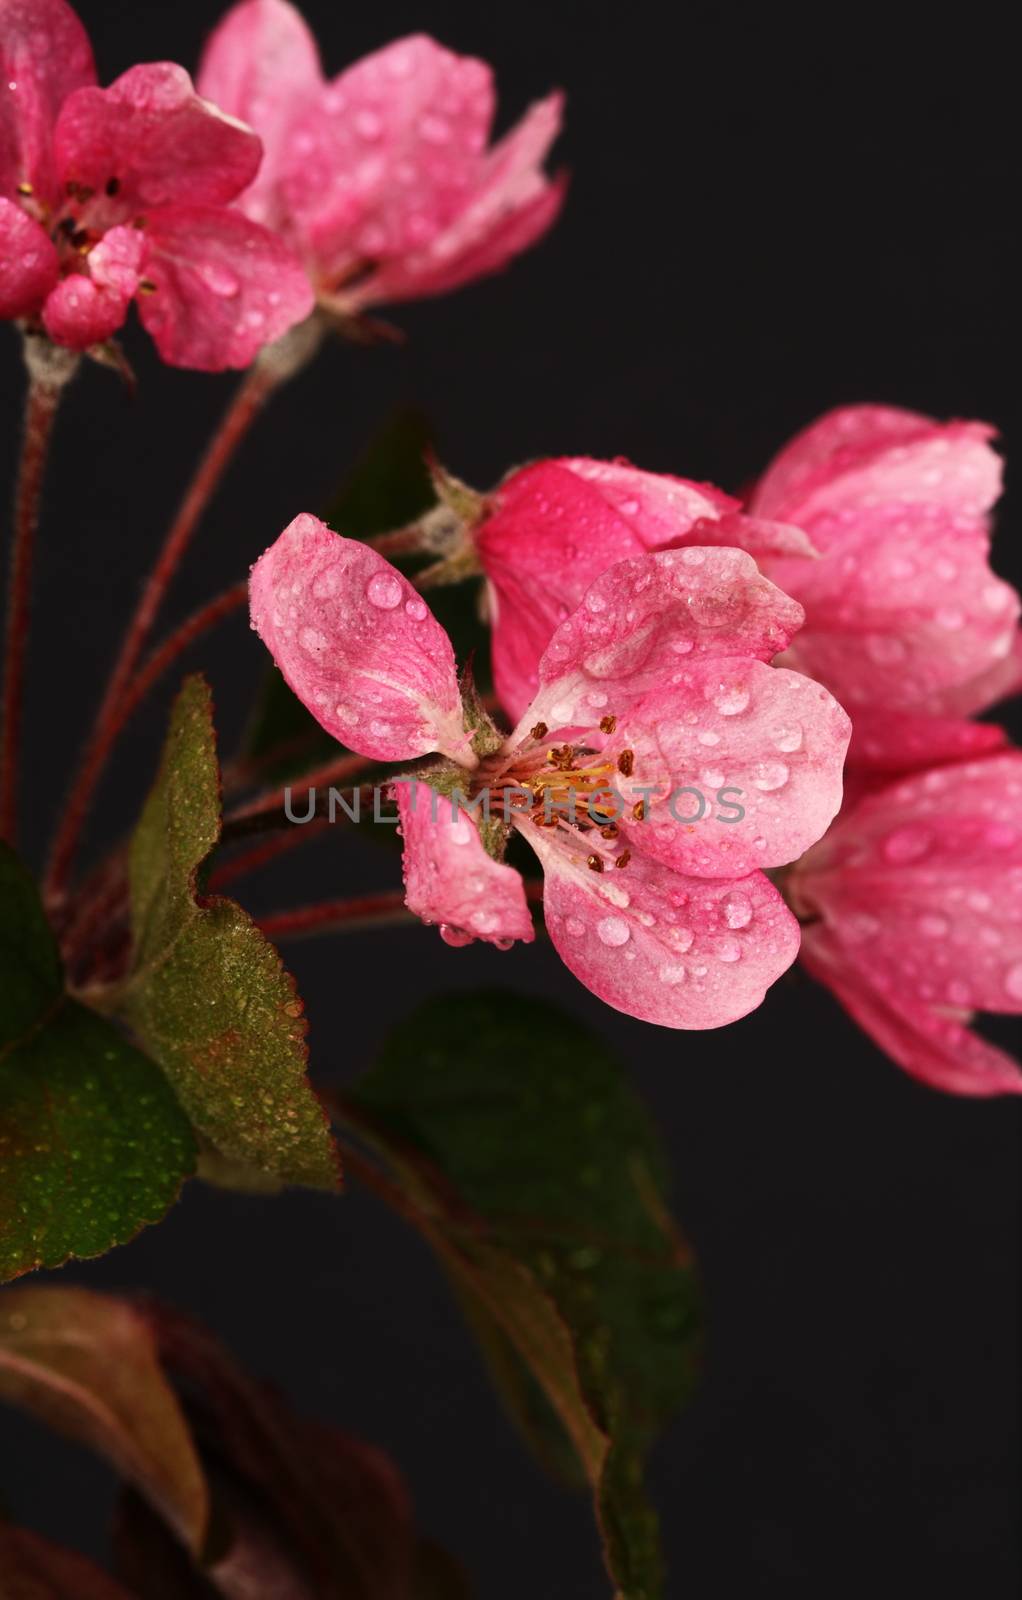 Crab apple blossom by mitzy